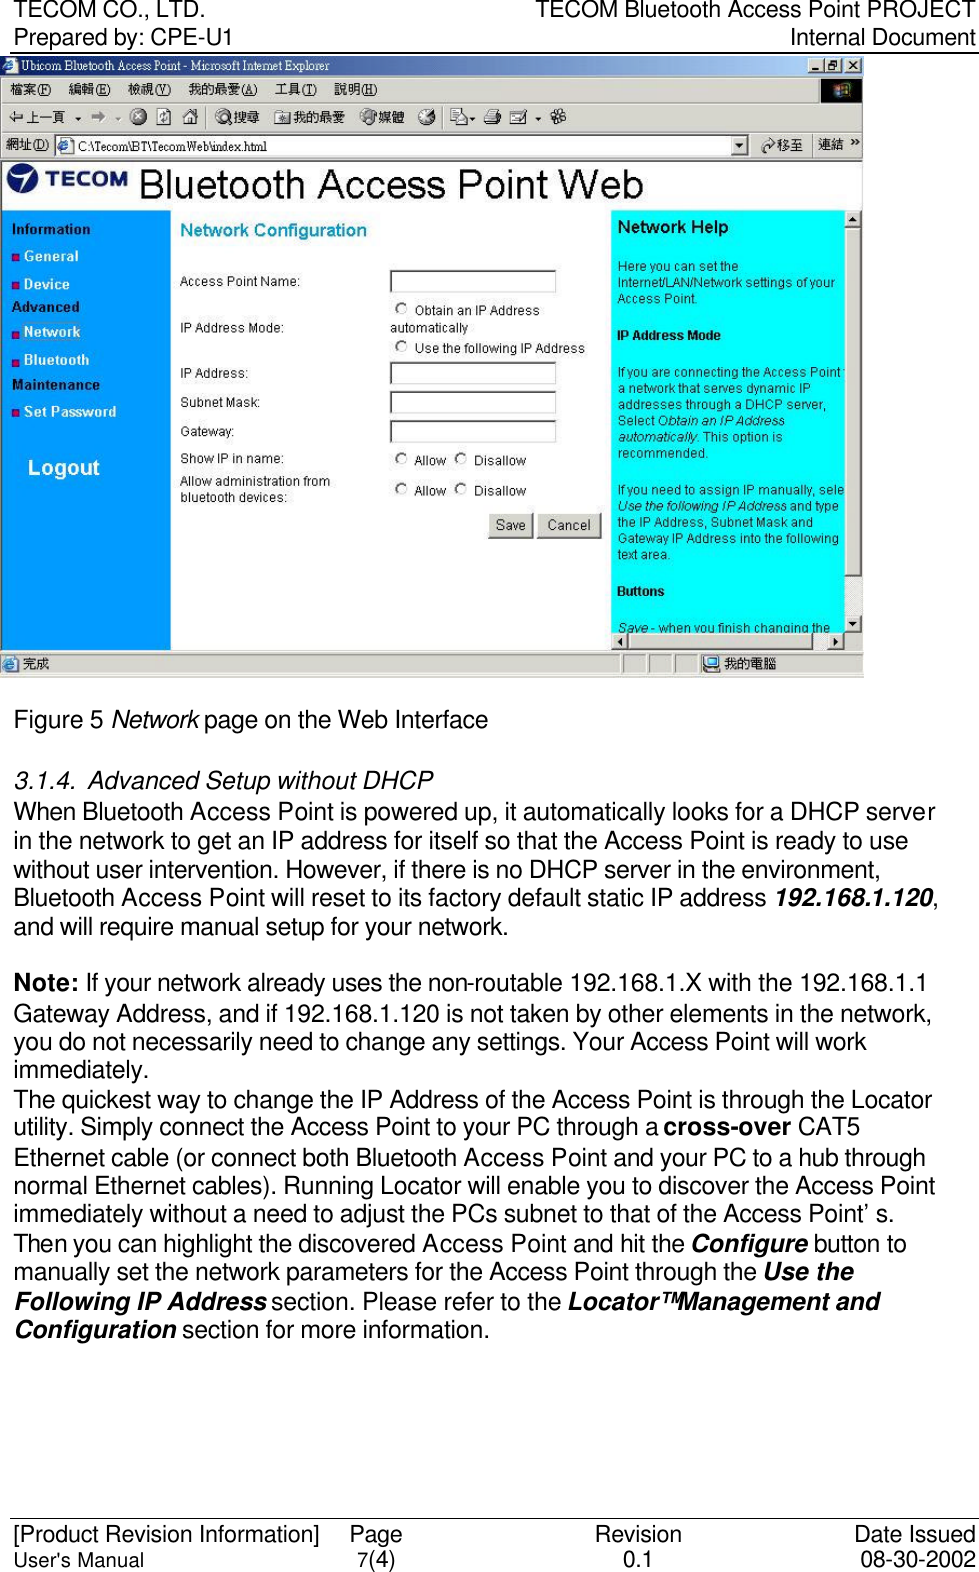 TECOM CO., LTD. TECOM Bluetooth Access Point PROJECT Prepared by: CPE-U1   Internal Document  [Product Revision Information] Page Revision Date Issued User&apos;s Manual 7(4) 0.1 08-30-2002  Figure 5 Network page on the Web Interface 3.1.4. Advanced Setup without DHCP When Bluetooth Access Point is powered up, it automatically looks for a DHCP server in the network to get an IP address for itself so that the Access Point is ready to use without user intervention. However, if there is no DHCP server in the environment, Bluetooth Access Point will reset to its factory default static IP address 192.168.1.120, and will require manual setup for your network.    Note: If your network already uses the non-routable 192.168.1.X with the 192.168.1.1 Gateway Address, and if 192.168.1.120 is not taken by other elements in the network, you do not necessarily need to change any settings. Your Access Point will work immediately.   The quickest way to change the IP Address of the Access Point is through the Locator utility. Simply connect the Access Point to your PC through a cross-over CAT5 Ethernet cable (or connect both Bluetooth Access Point and your PC to a hub through normal Ethernet cables). Running Locator will enable you to discover the Access Point immediately without a need to adjust the PCs subnet to that of the Access Point’s. Then you can highlight the discovered Access Point and hit the Configure button to manually set the network parameters for the Access Point through the Use the Following IP Address section. Please refer to the Locator™ Management and Configuration section for more information. 